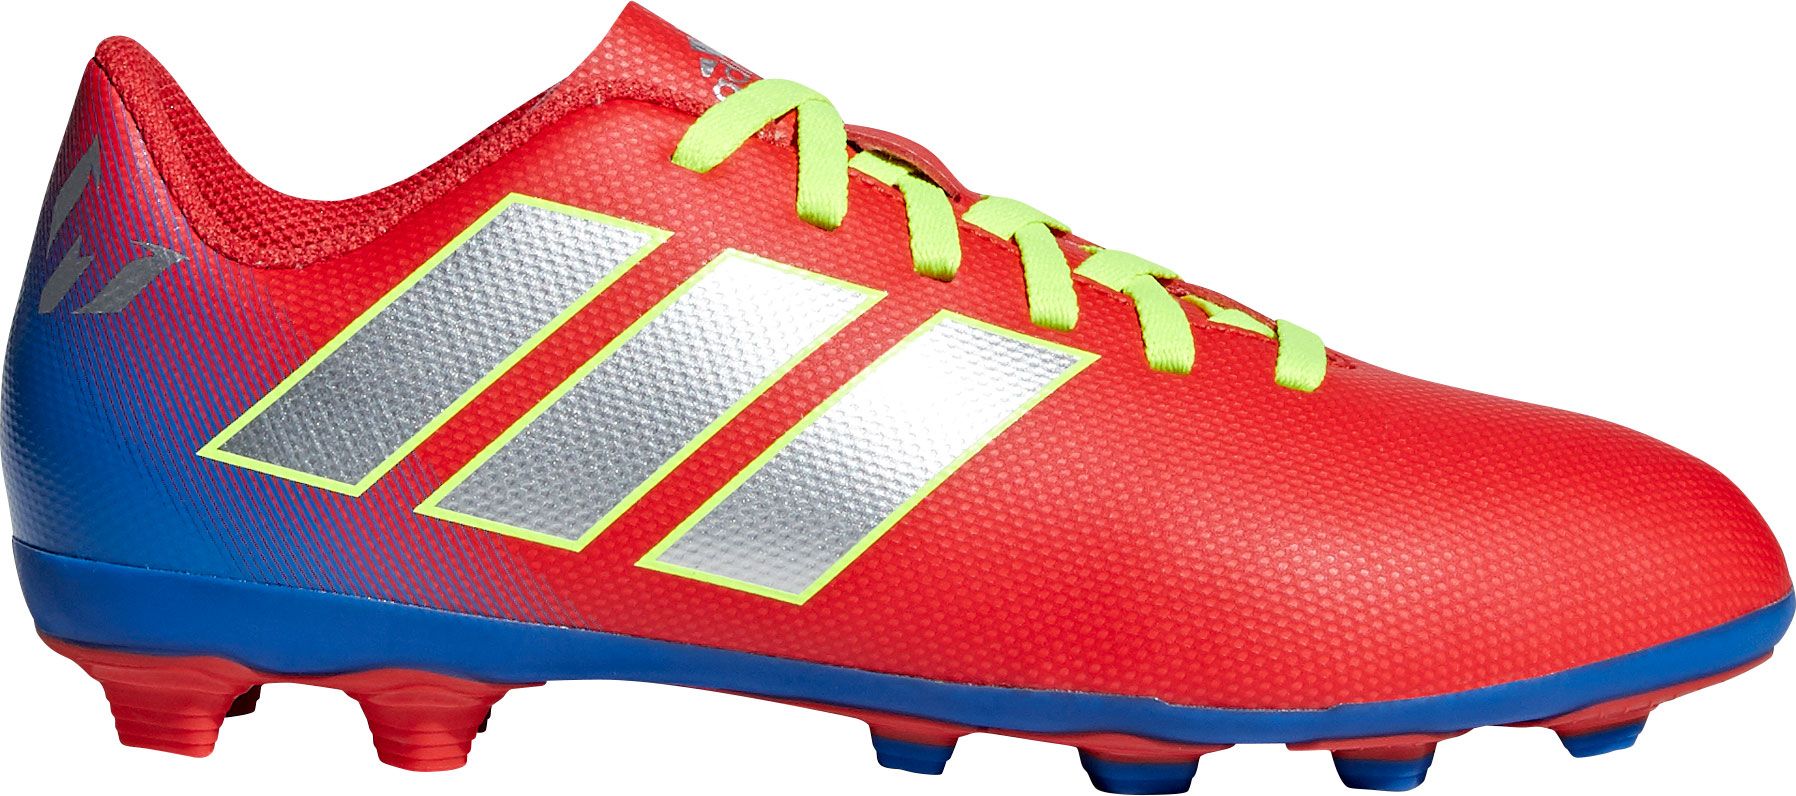 adidas messi indoor soccer shoes youth